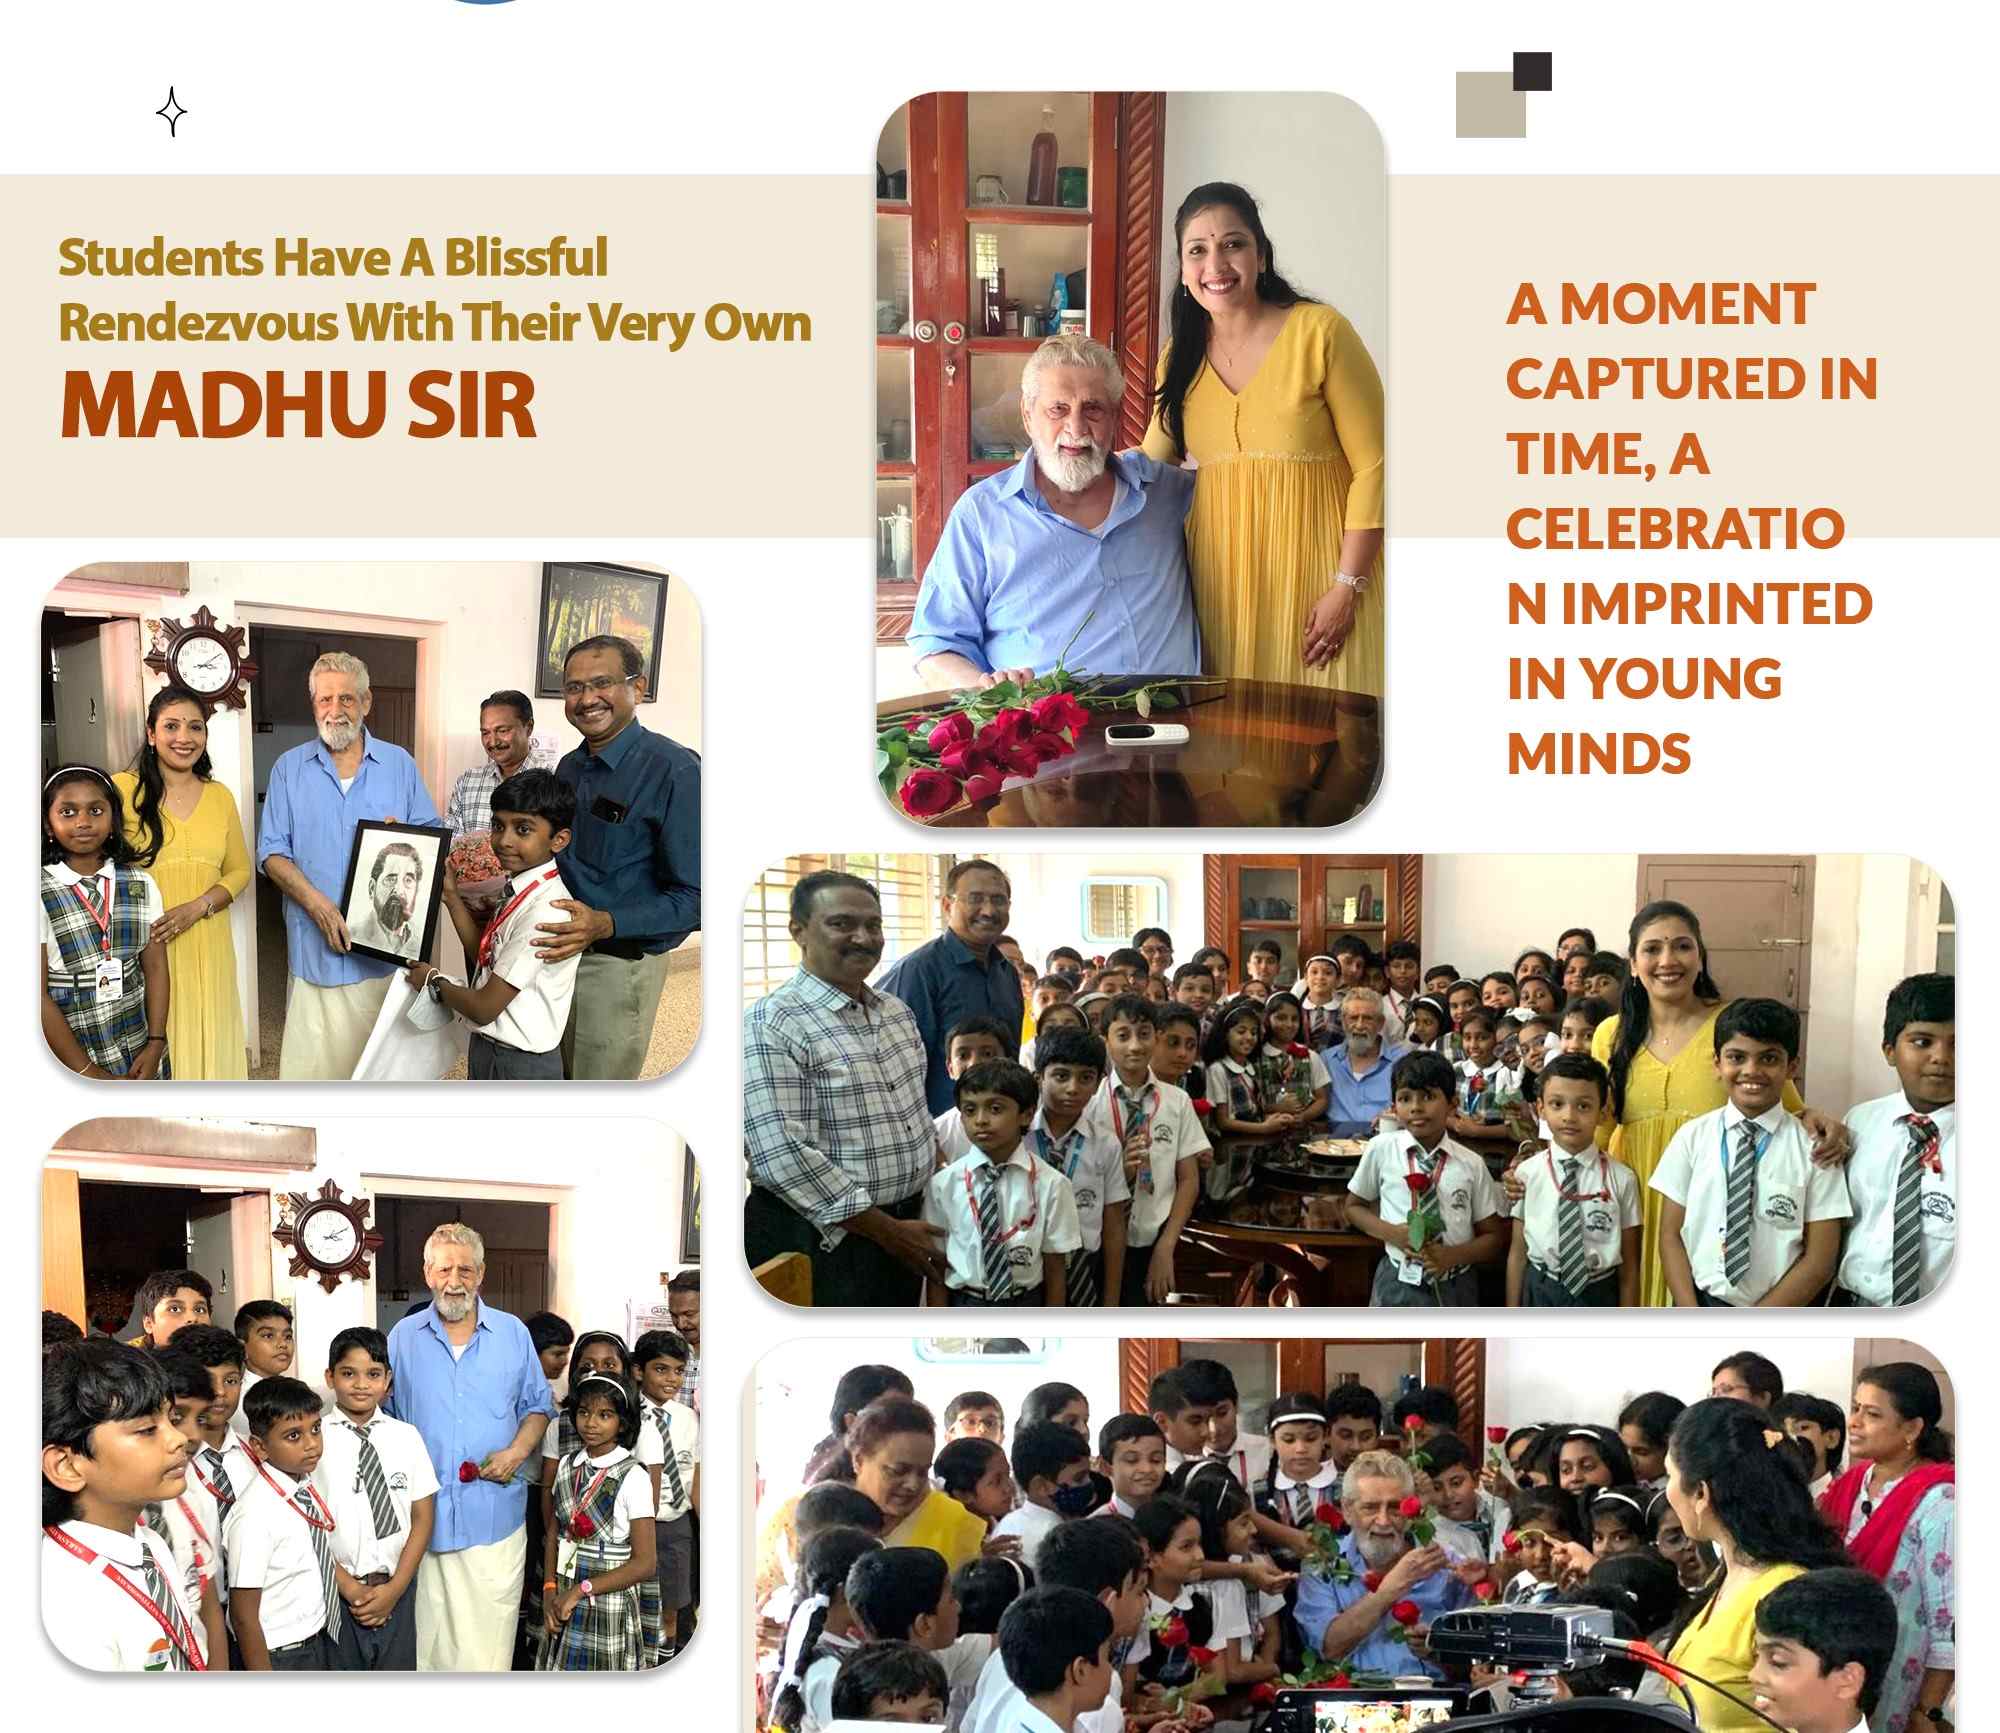 Students Have A Blissful Rendezvous With Their Very Own Madhu Sir